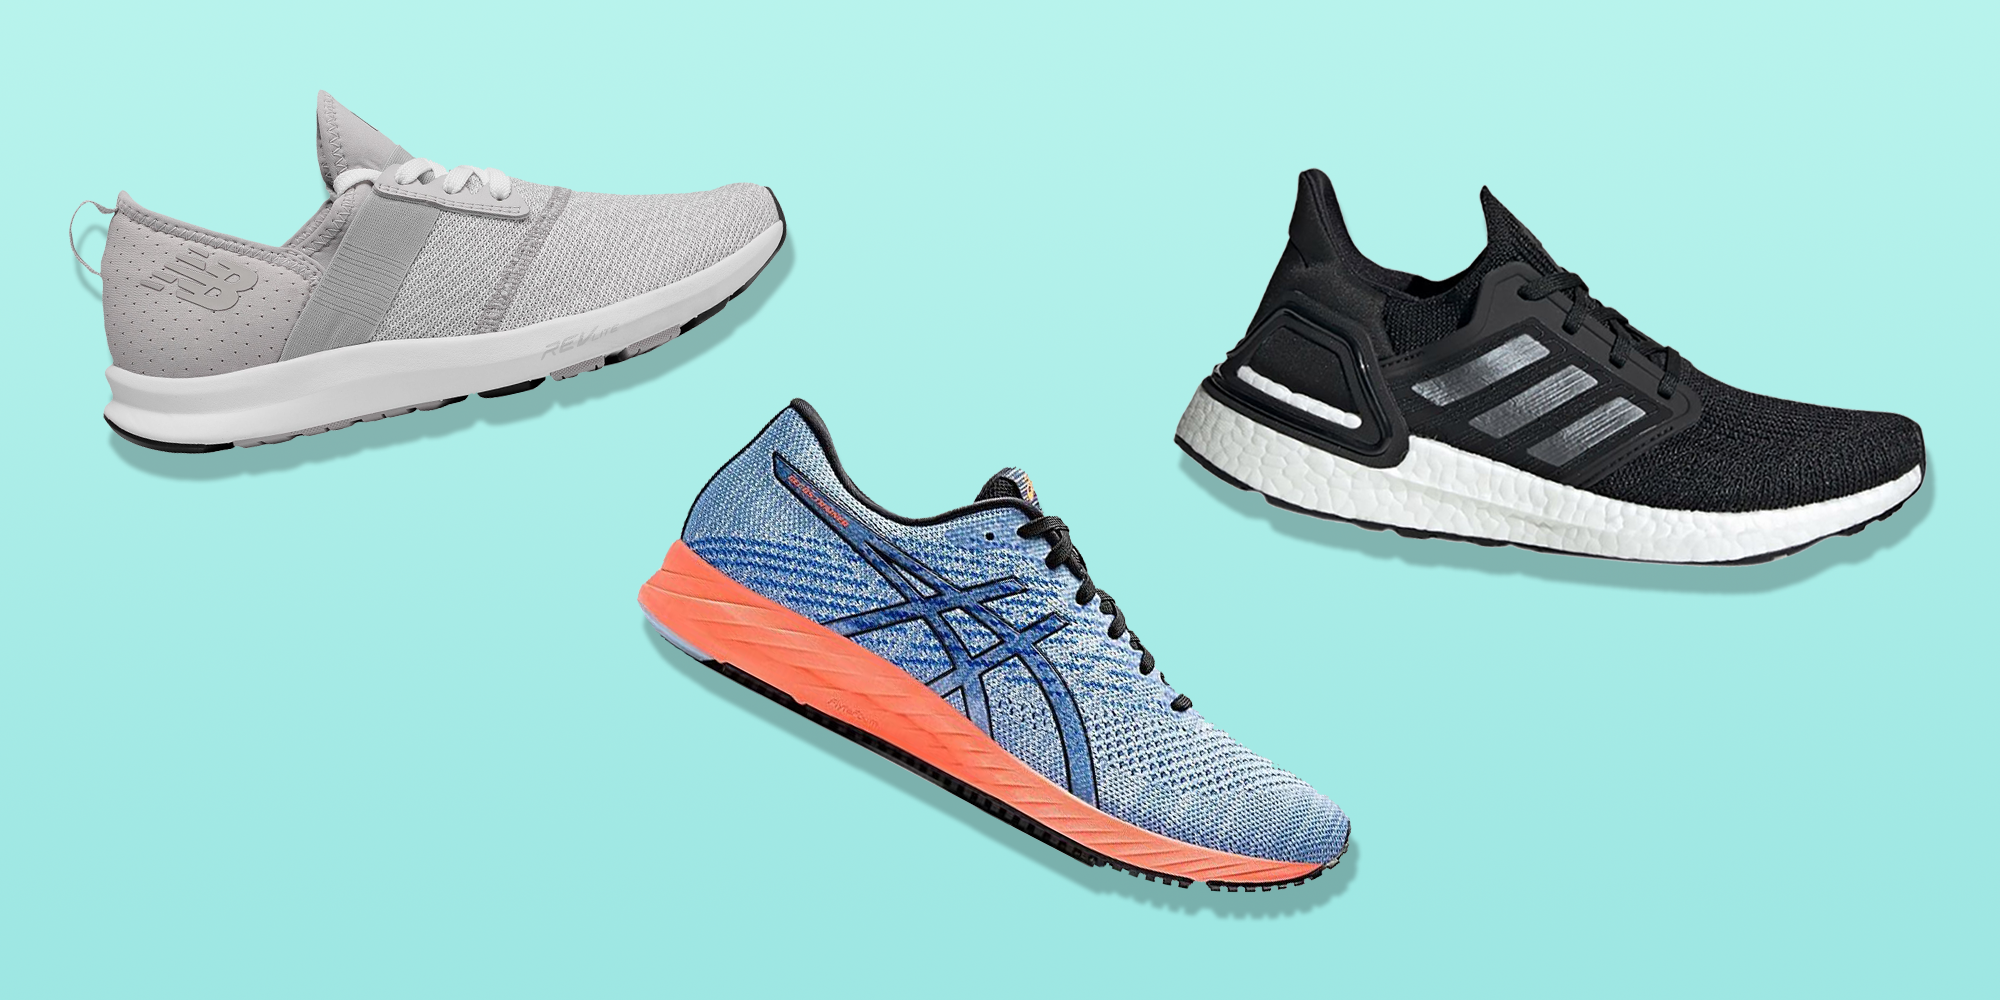 best workout shoes for lifting weights